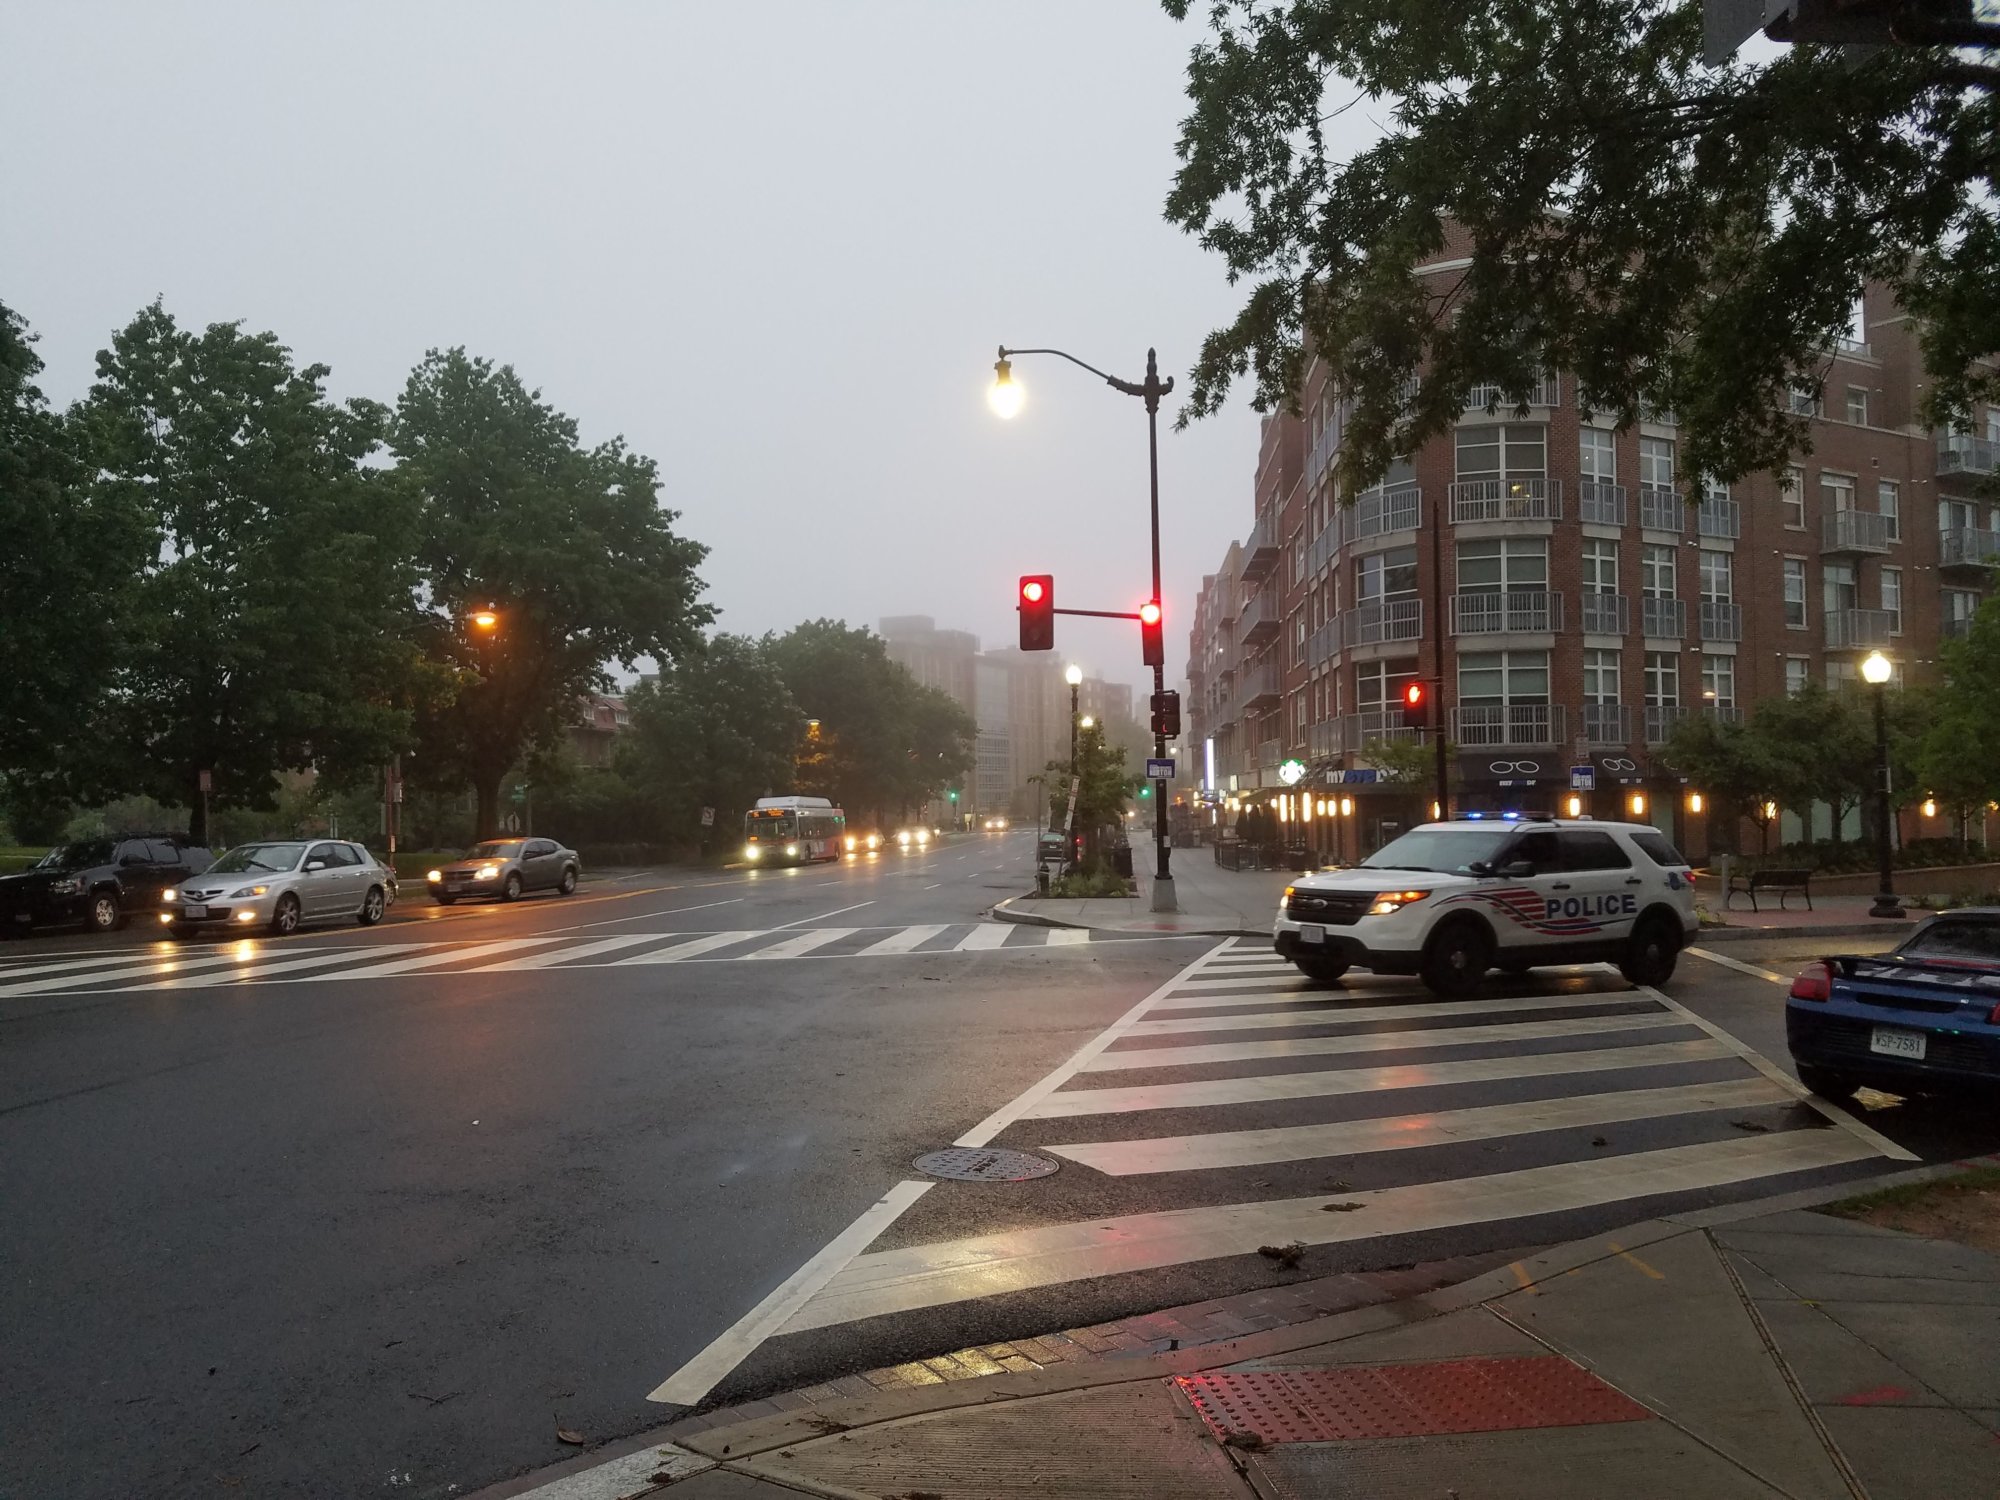 No sunshine: Md. city, DC area face fog and more flooding | WTOP